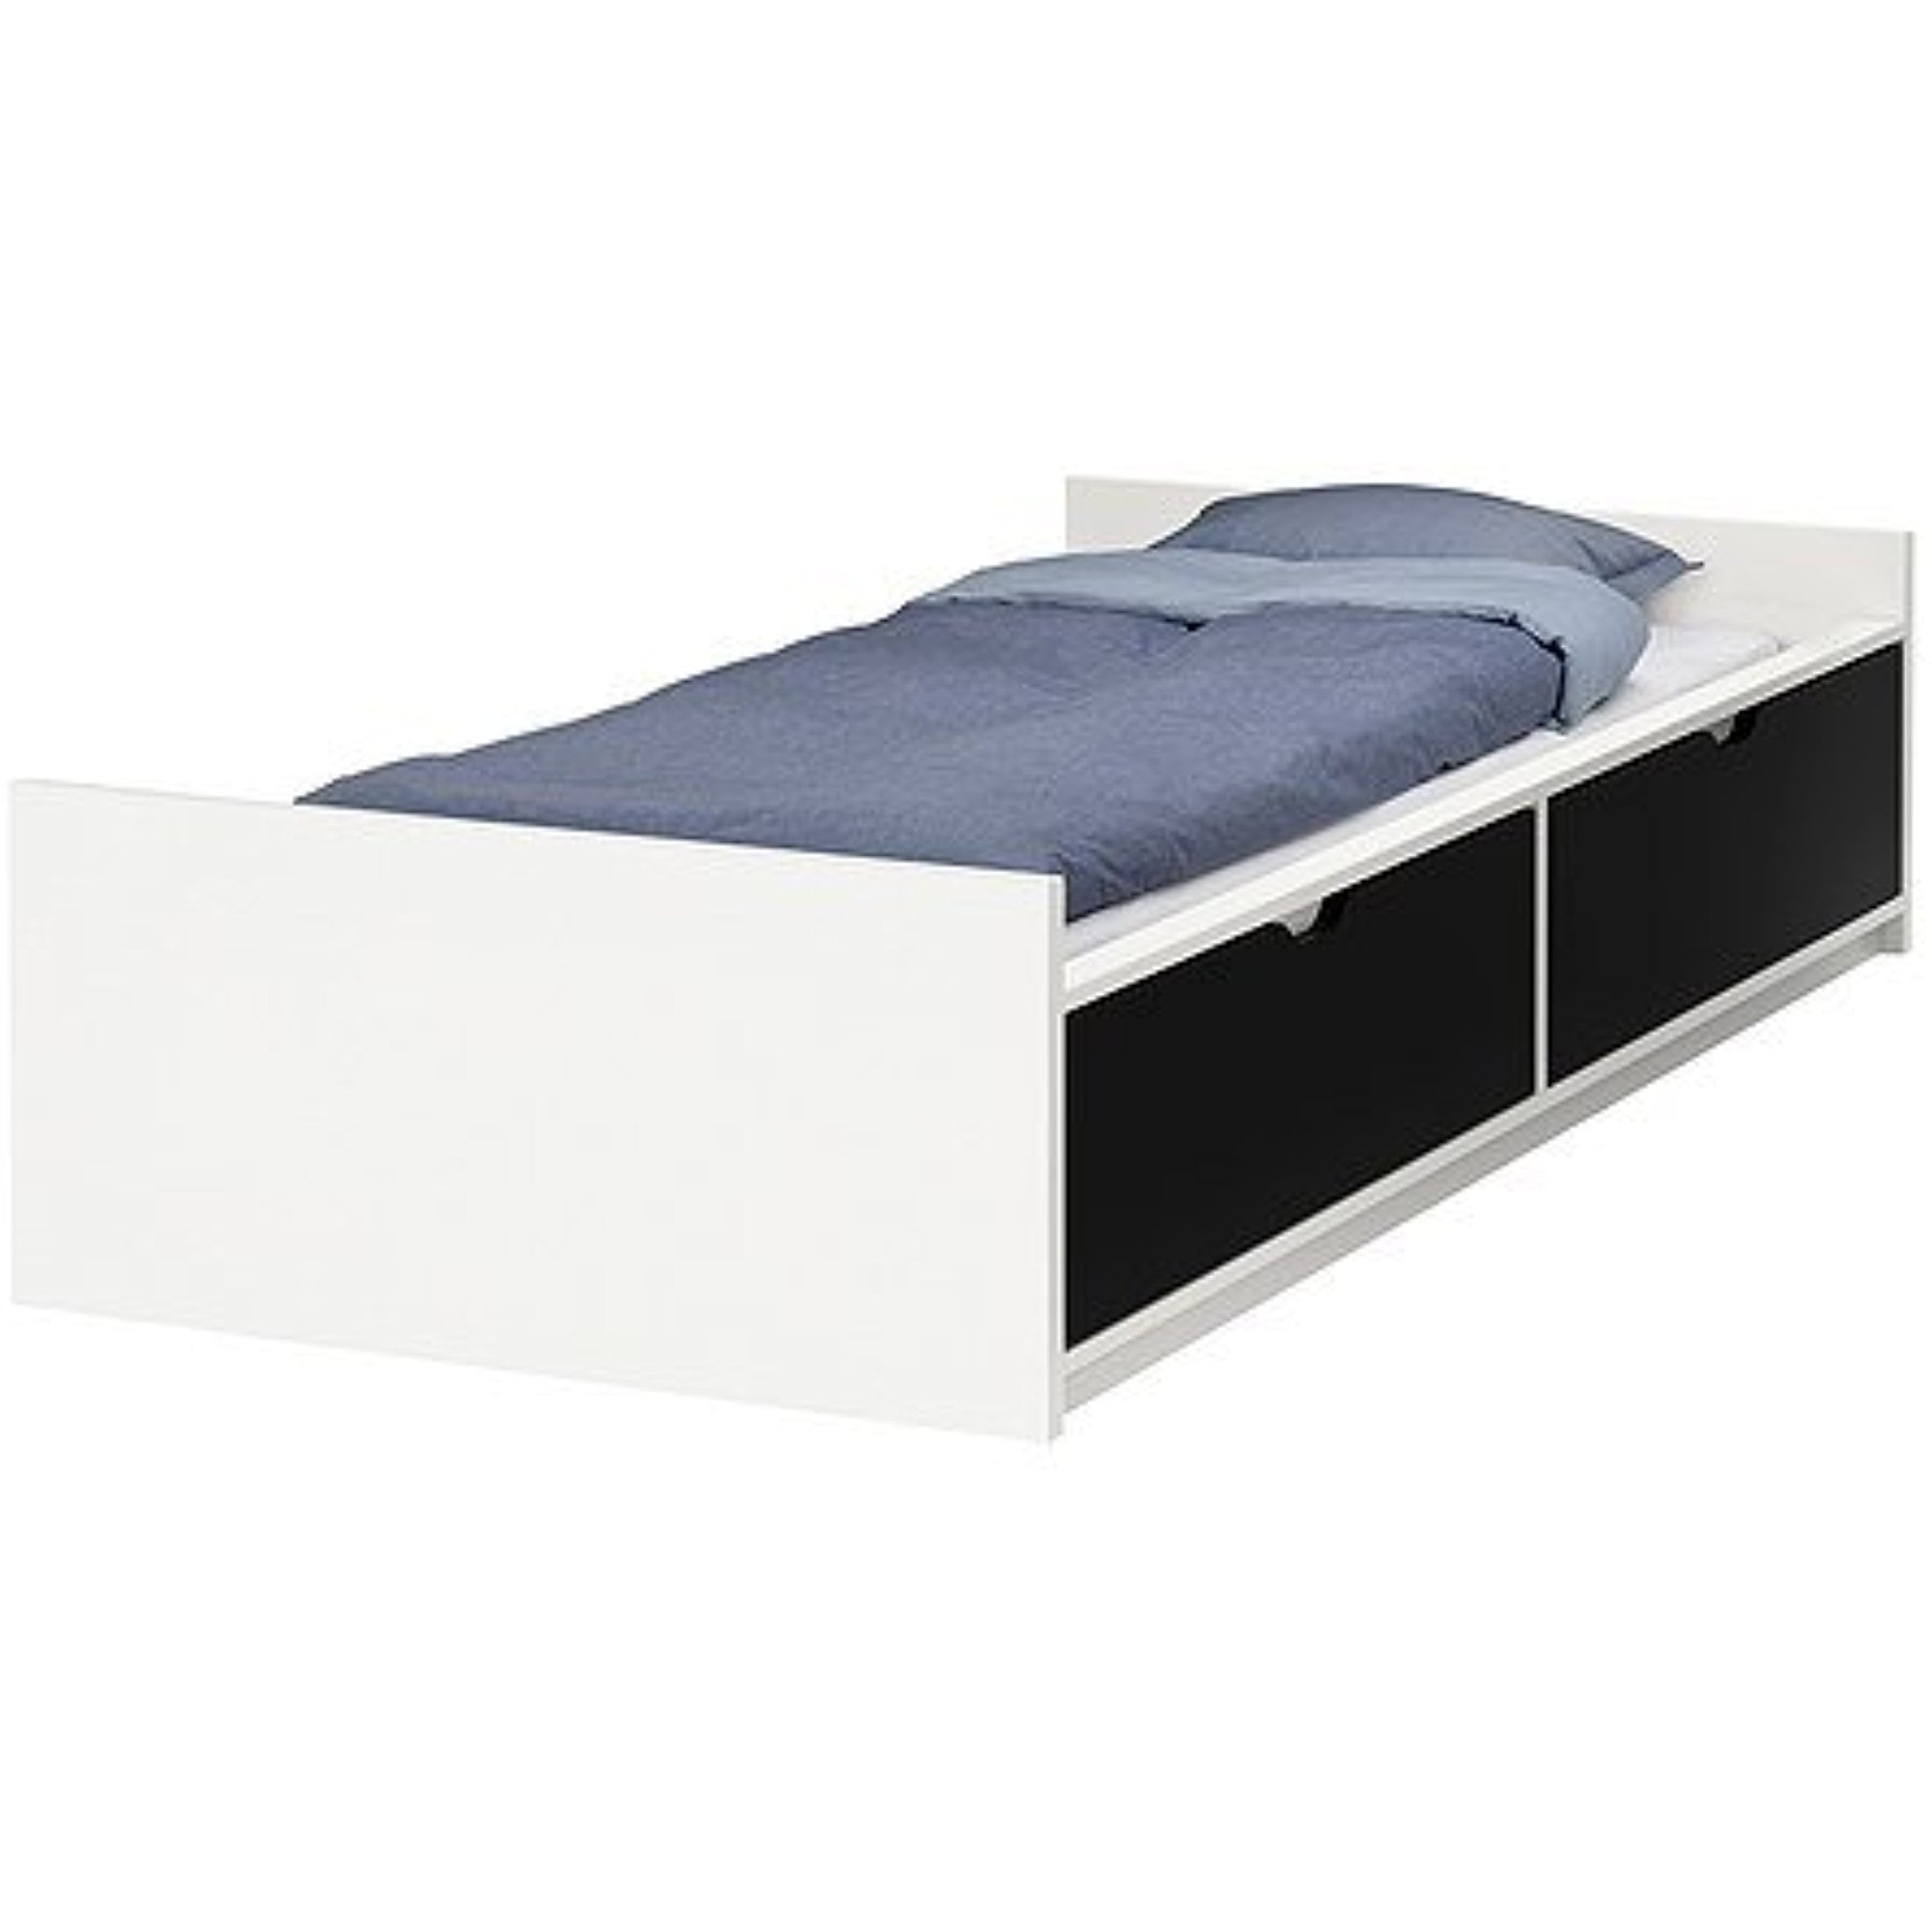 Ikea Twin Size Bed Frame W Storage Slatted Bedbase White 14382 11529 412 Walmart Com Walmart Com,Front Door And Shutter Colors For Red Brick House